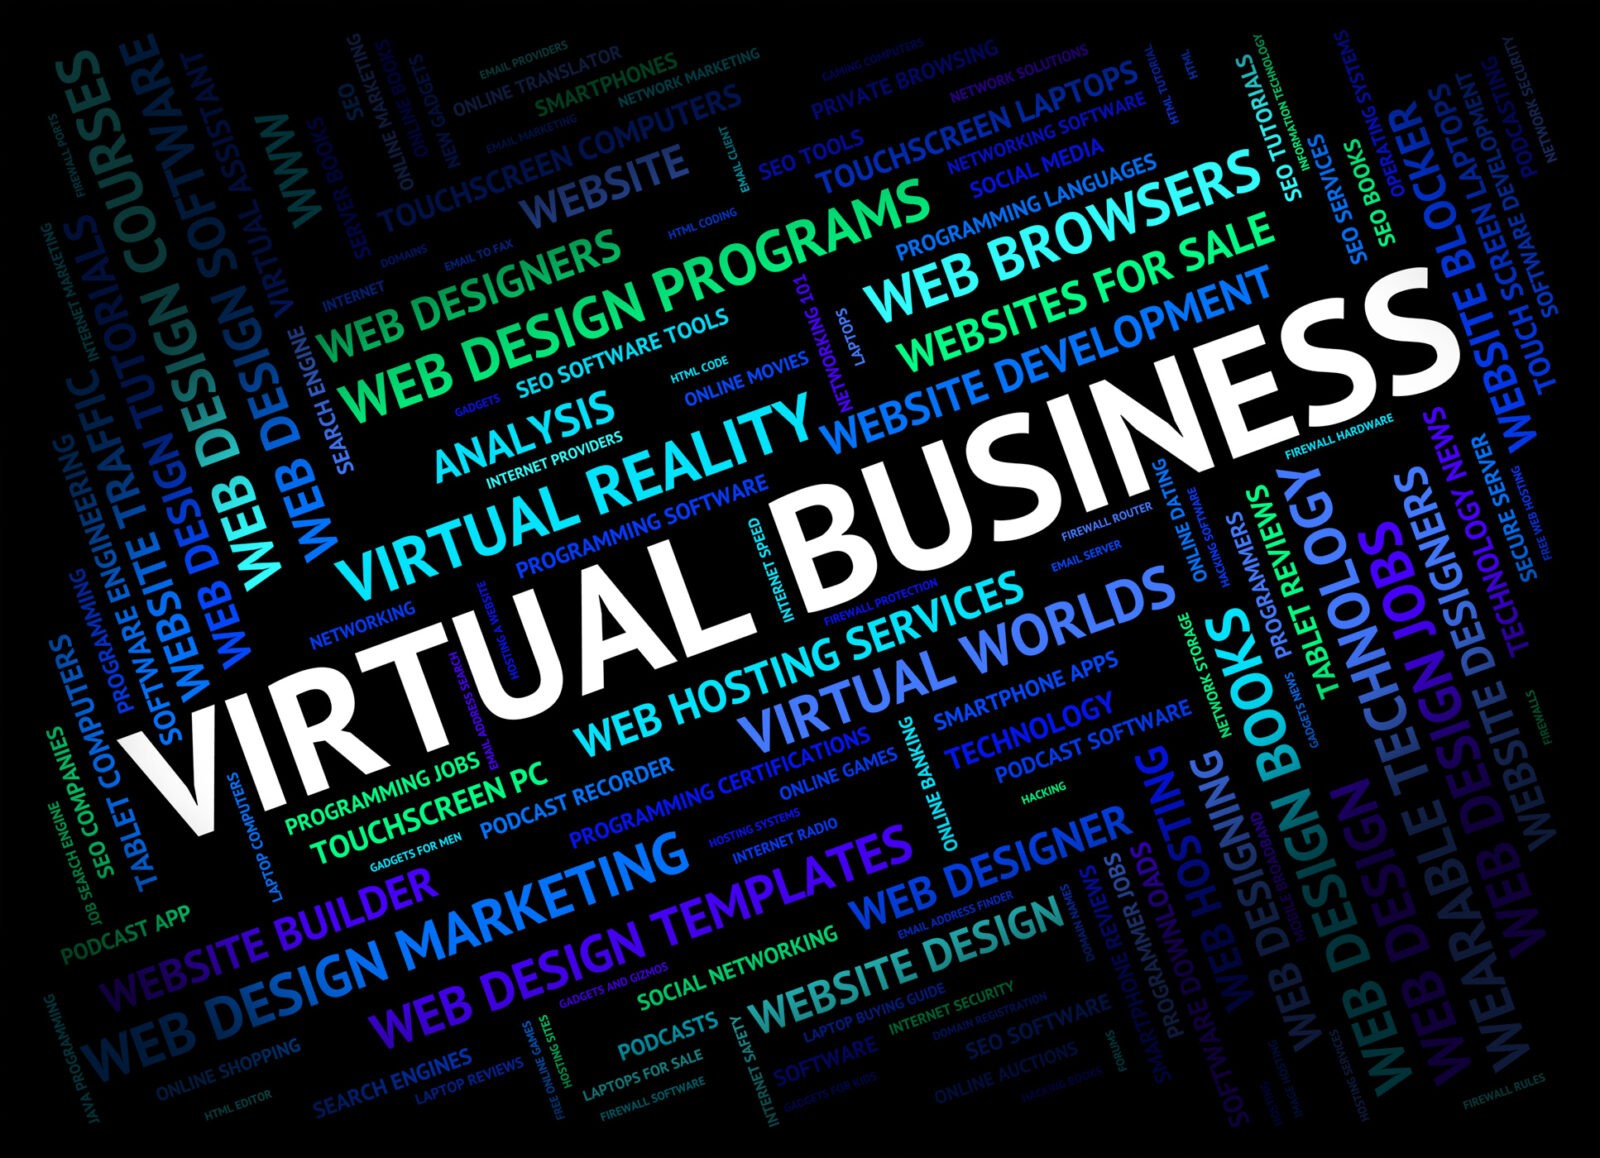 Virtual Business in White font with a montage of words describing business success surrounding it in blue and teal font.